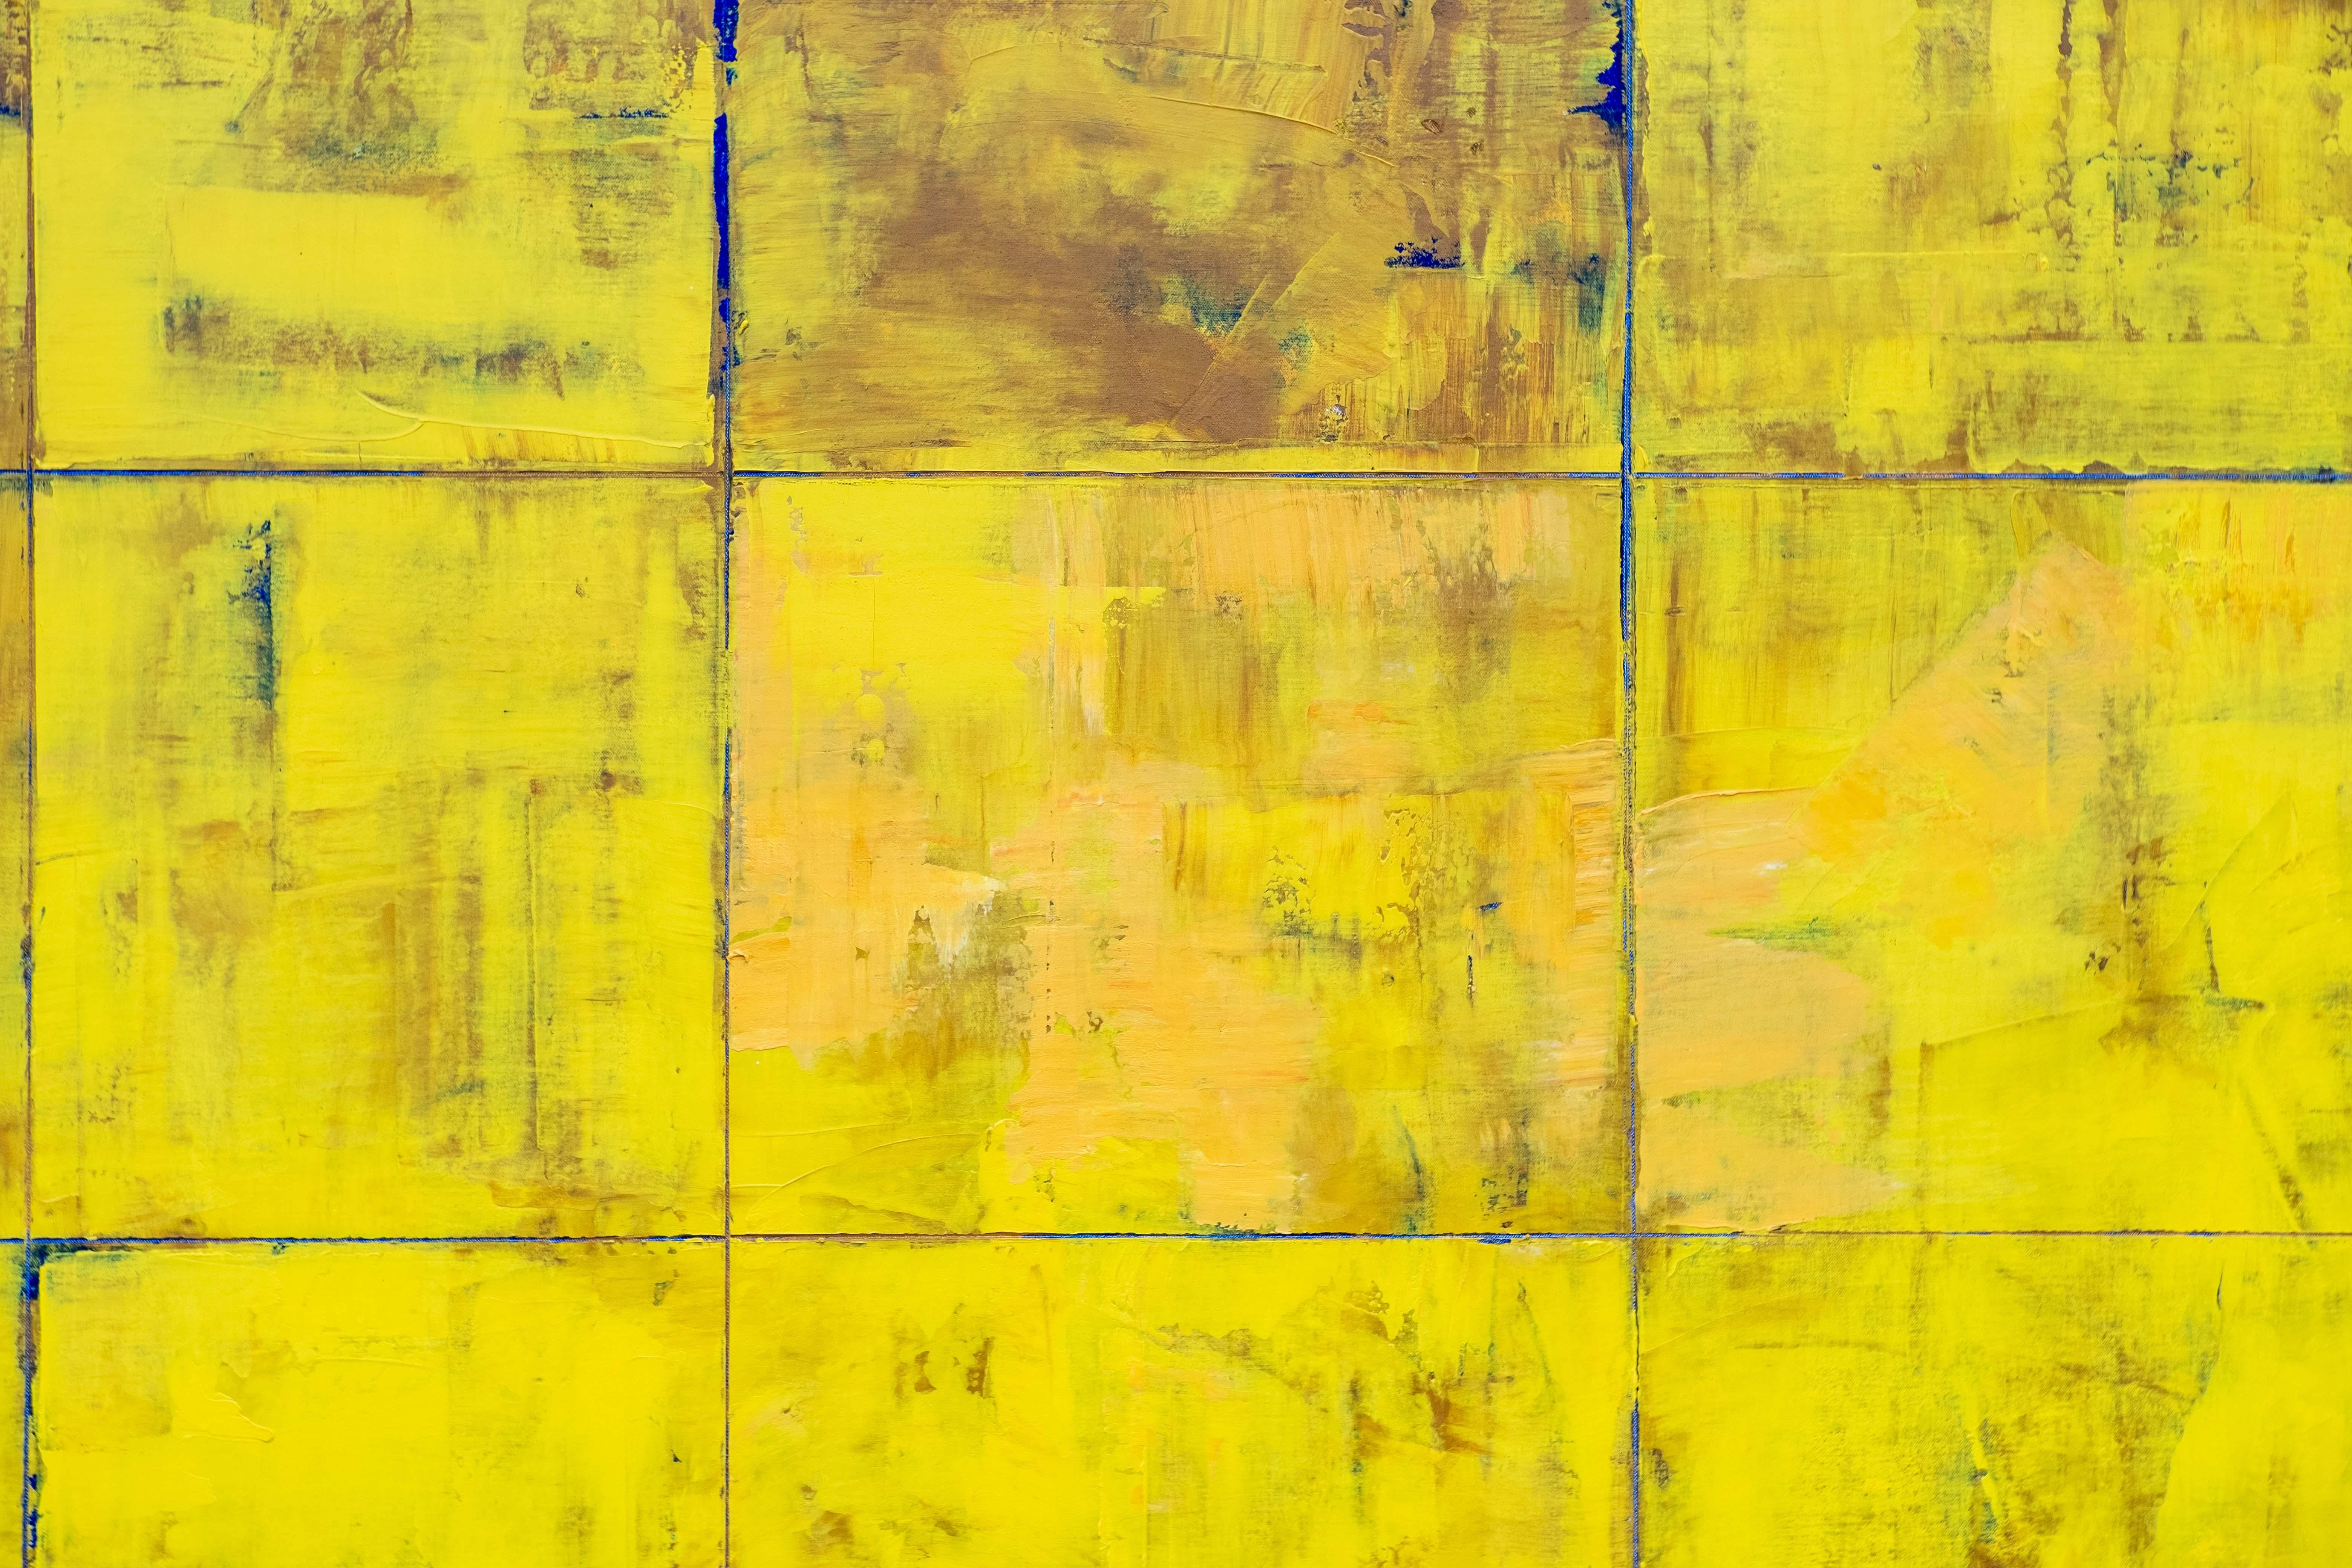 Amida - large, bright, colorful, yellow, abstract grid, modernist, oil on canvas 3